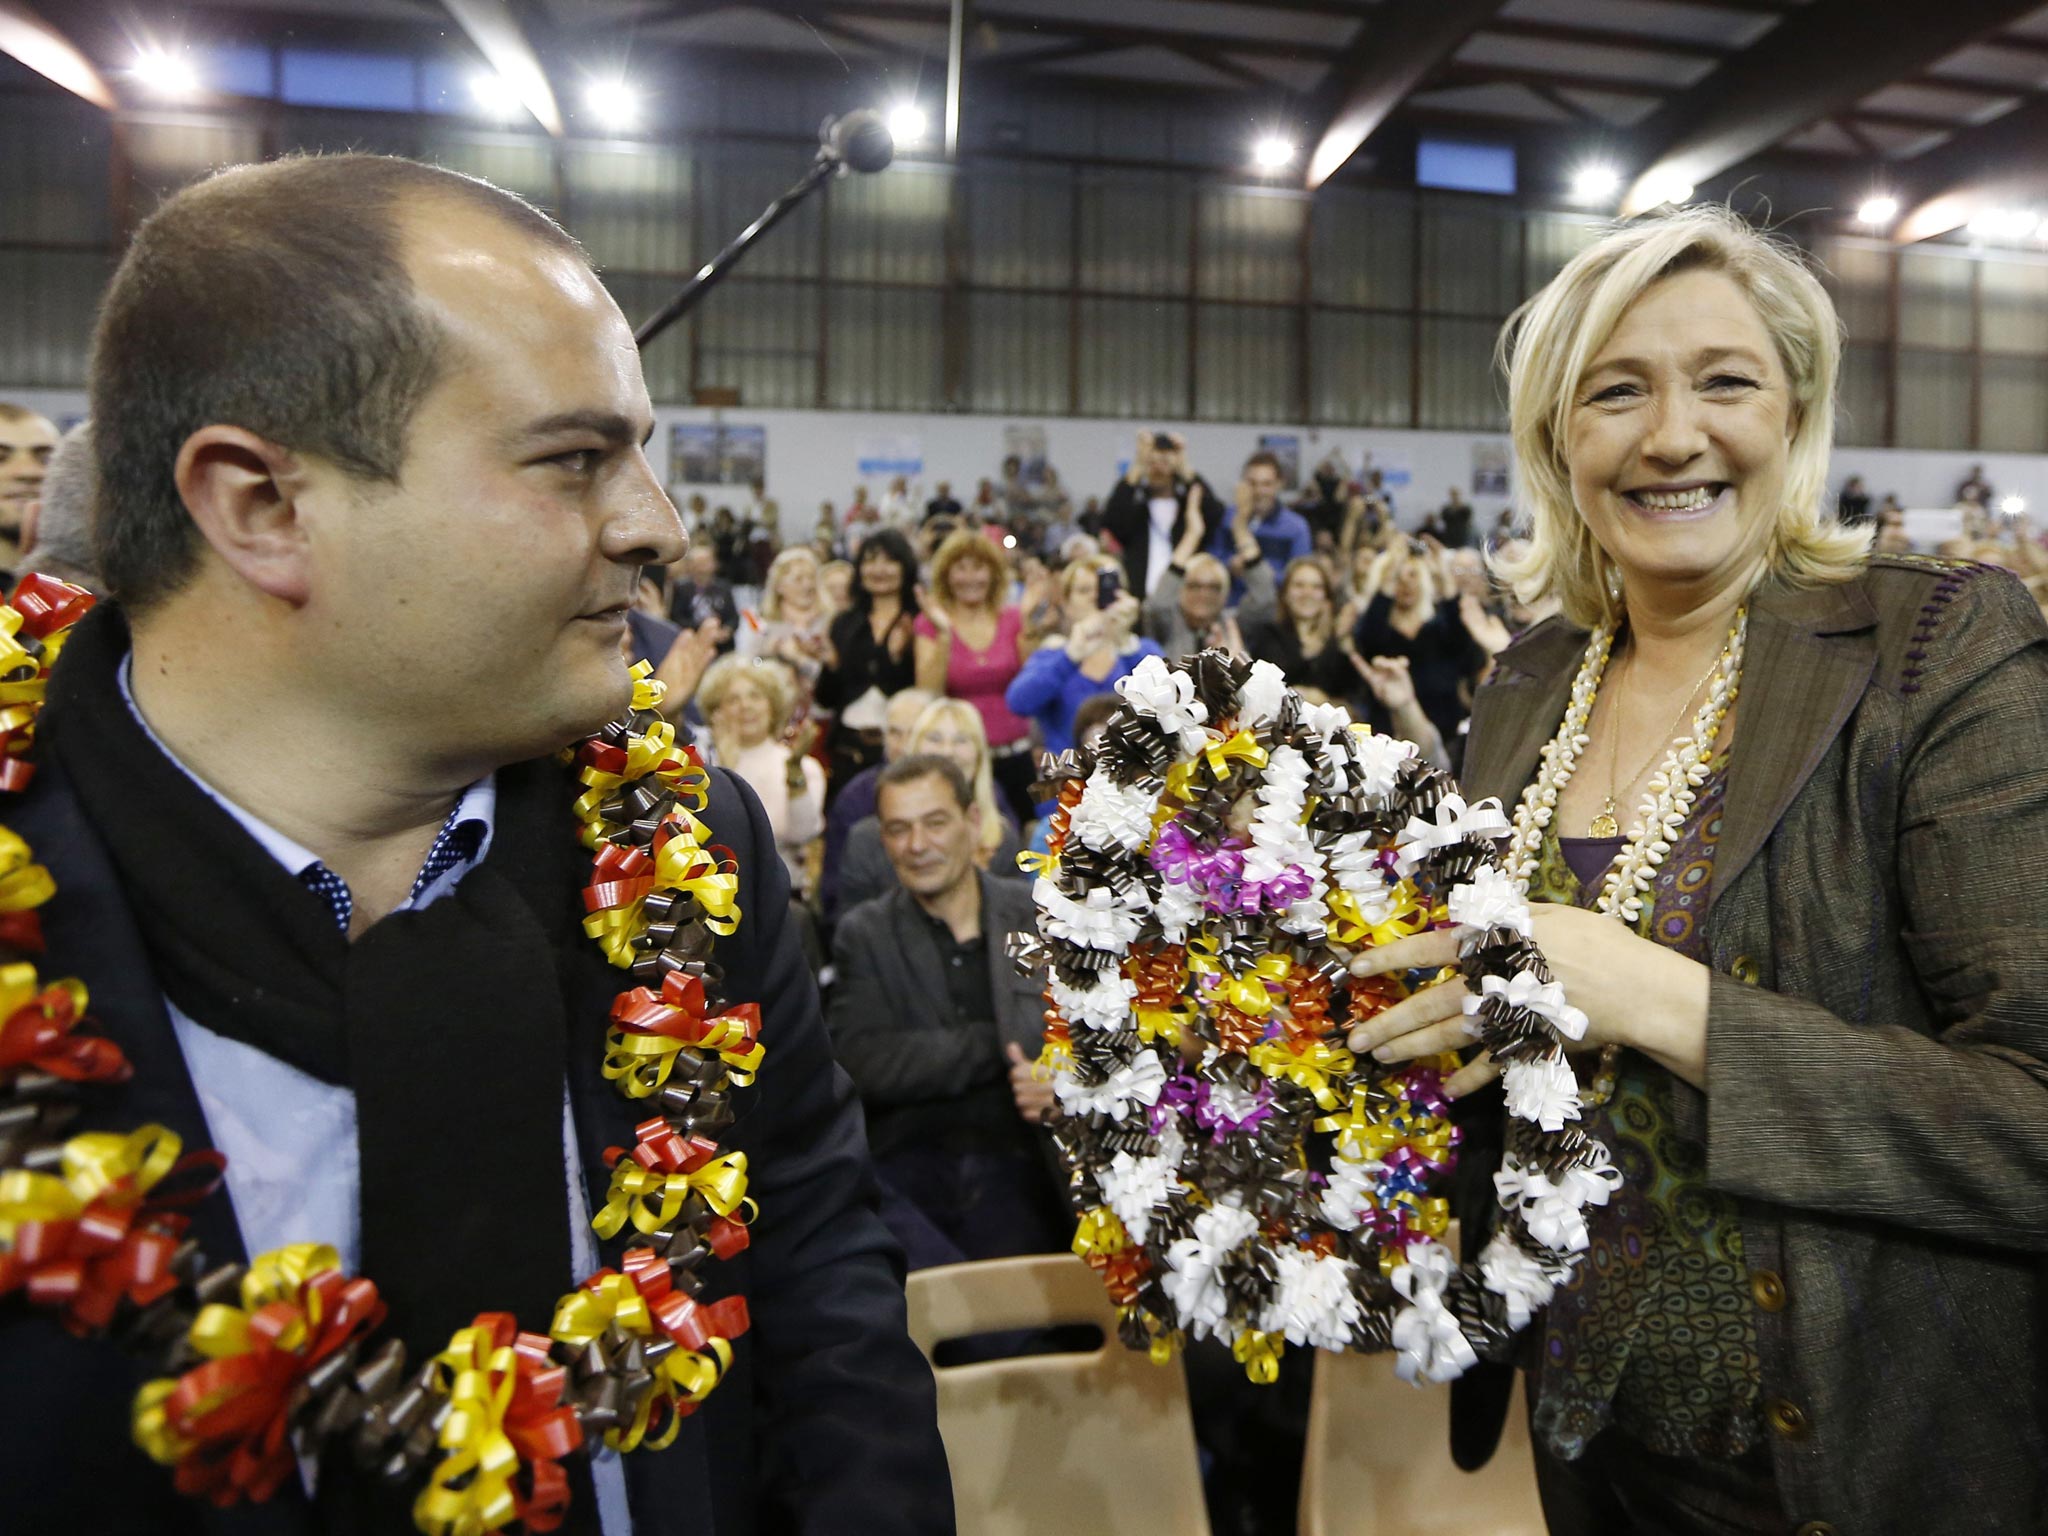 The National Front president Marine Le Pen and David Rachline, the party’s candidate for tomorrow’s mayoral elections in Fréjus, at a campaign meeting earlier this month